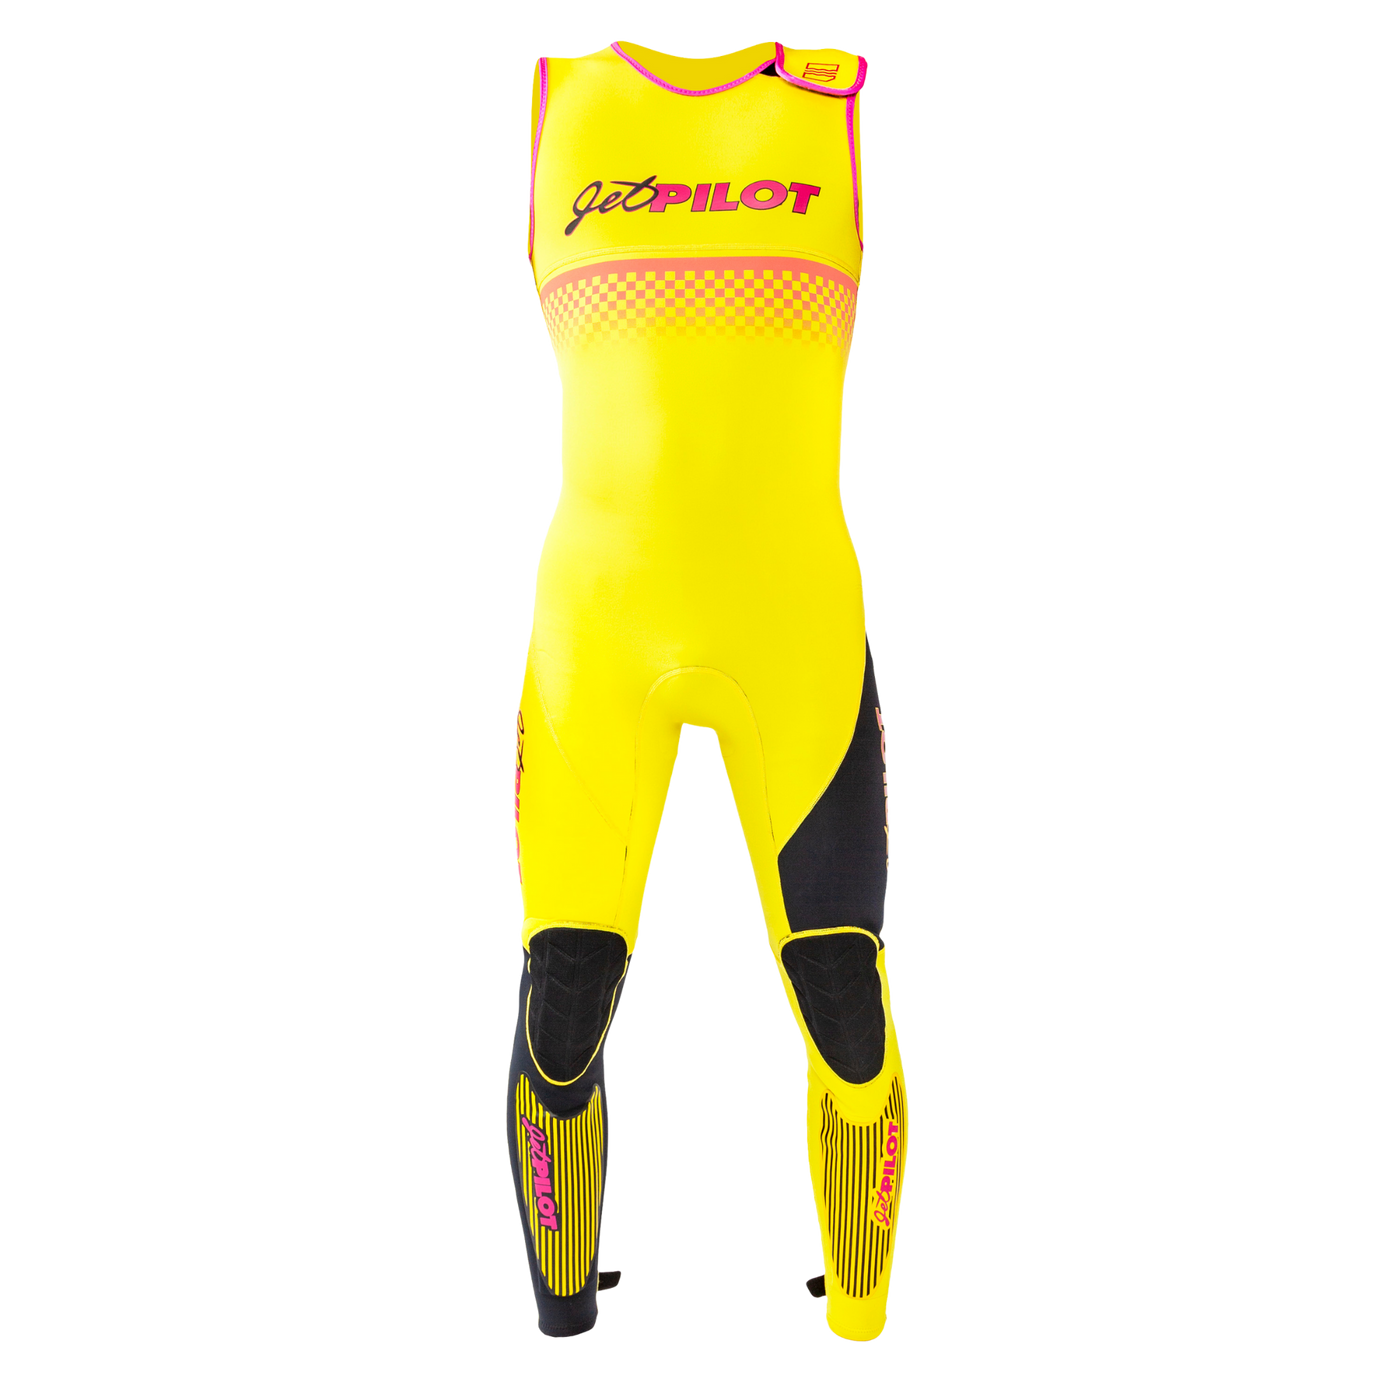 Front view of the Jetpilot Vintage John Wetsuit Yellow Black colorway.